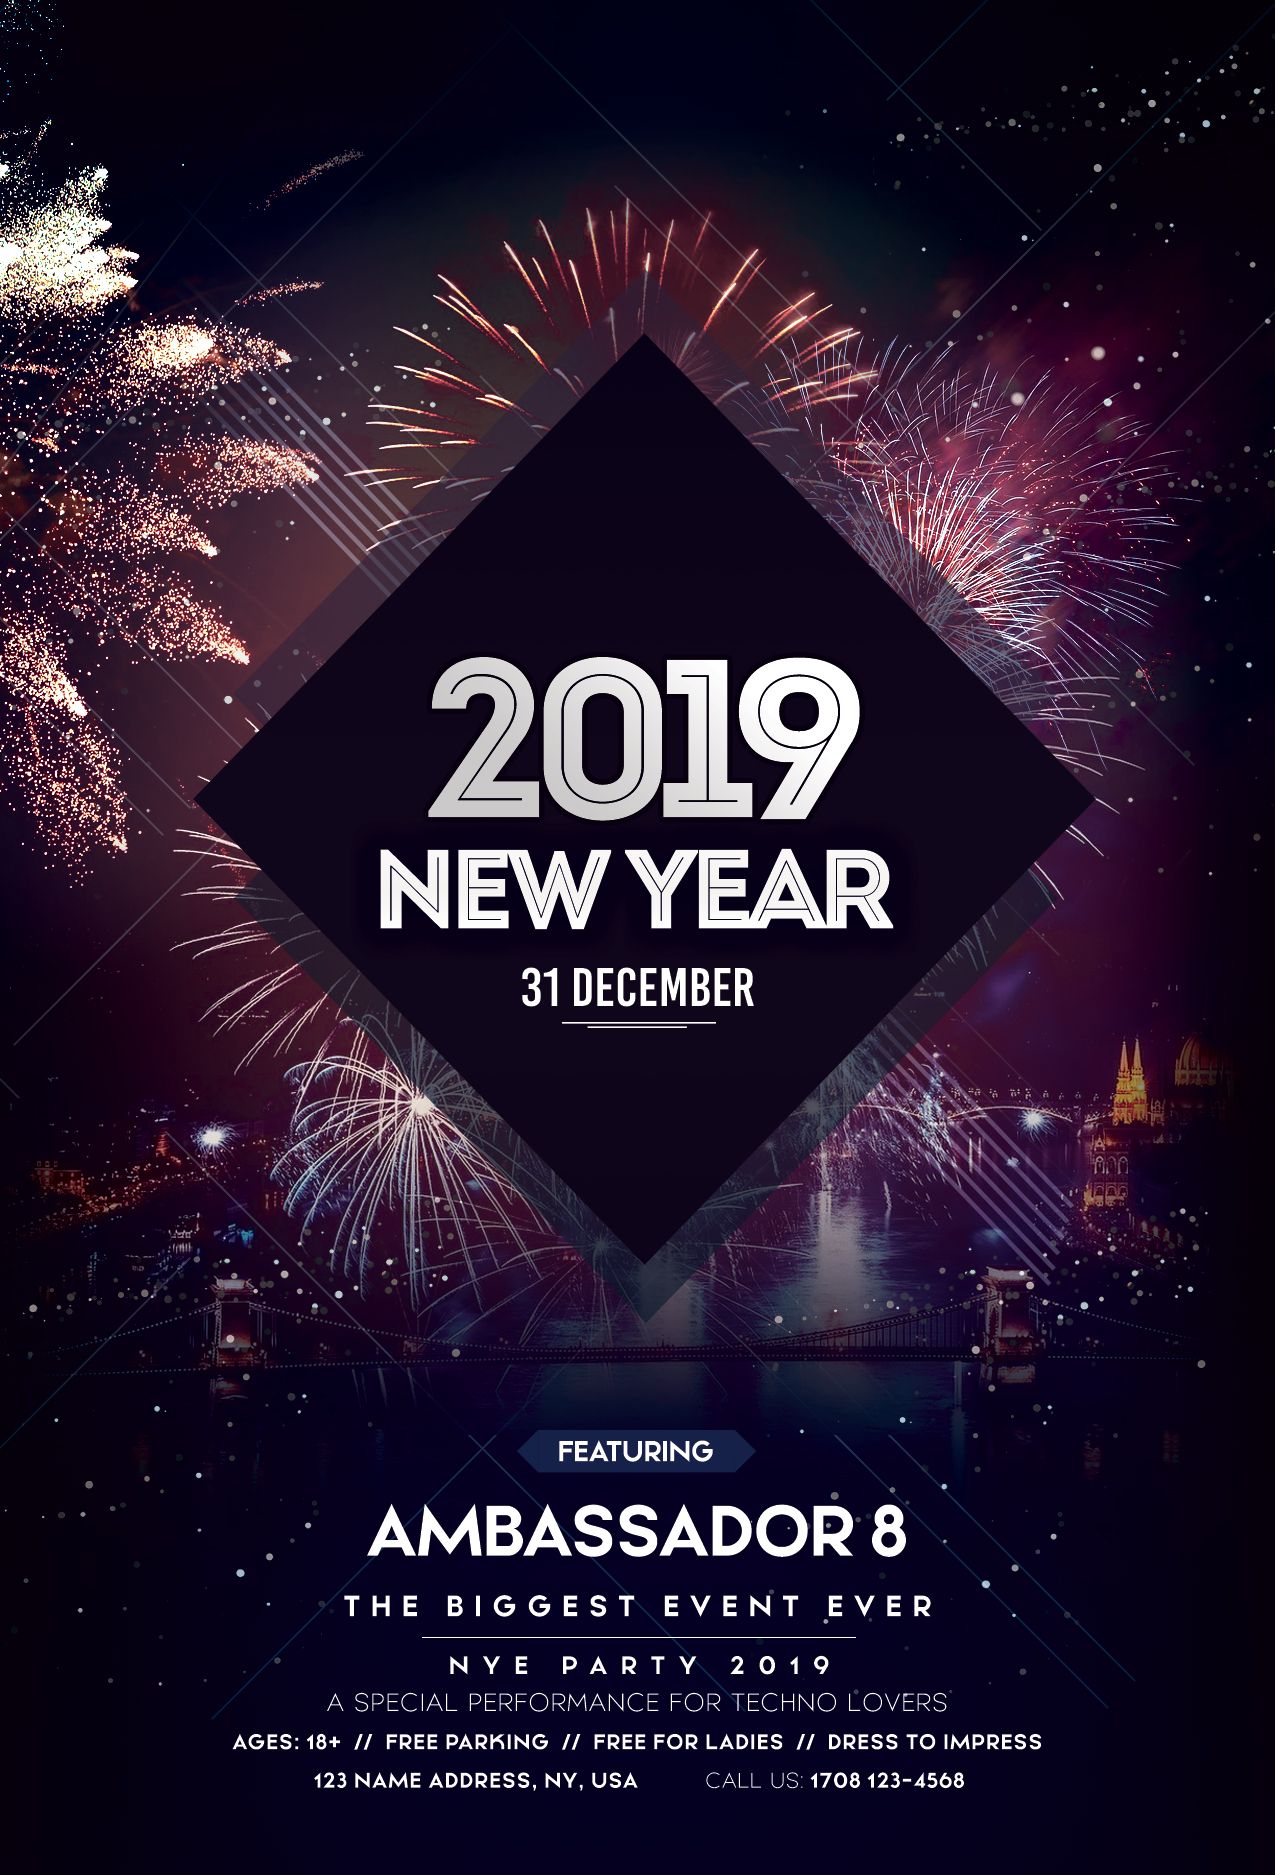 new year flyer template free, new year flyer templates, new year poster template, new year poster design 2021, new year party flyer template, new year 2021 flyer template free download, happy new year flyer psd free download, chinese new year poster template, new year flyer ideas, new year flyer psd